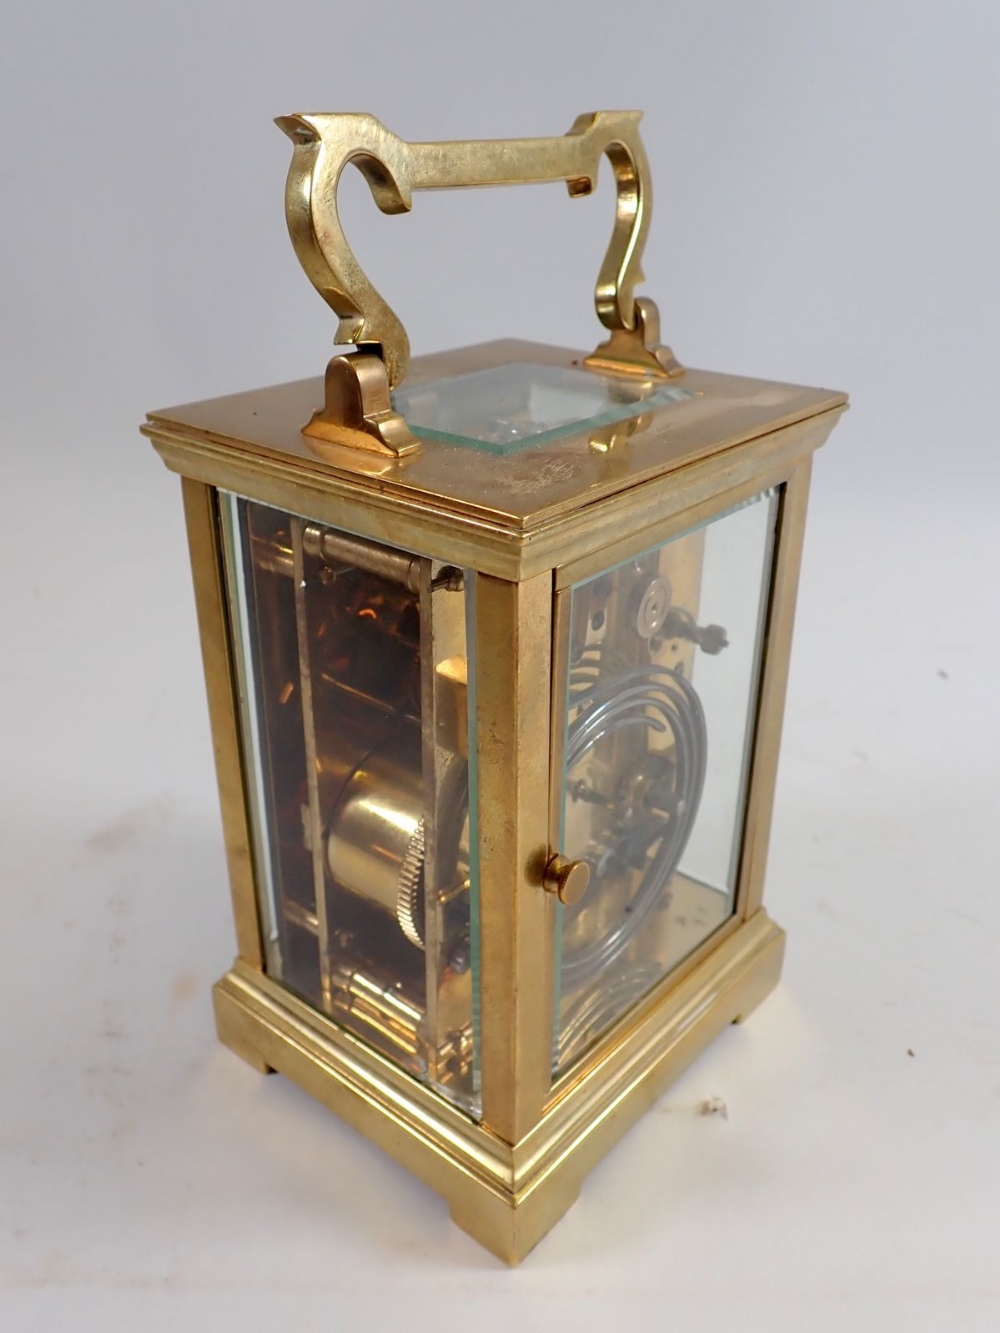 A brass carriage clock retailed by Marcks & Co Ltd, Bombay, presented to Mr Chatterton in Nagpur - Image 6 of 6